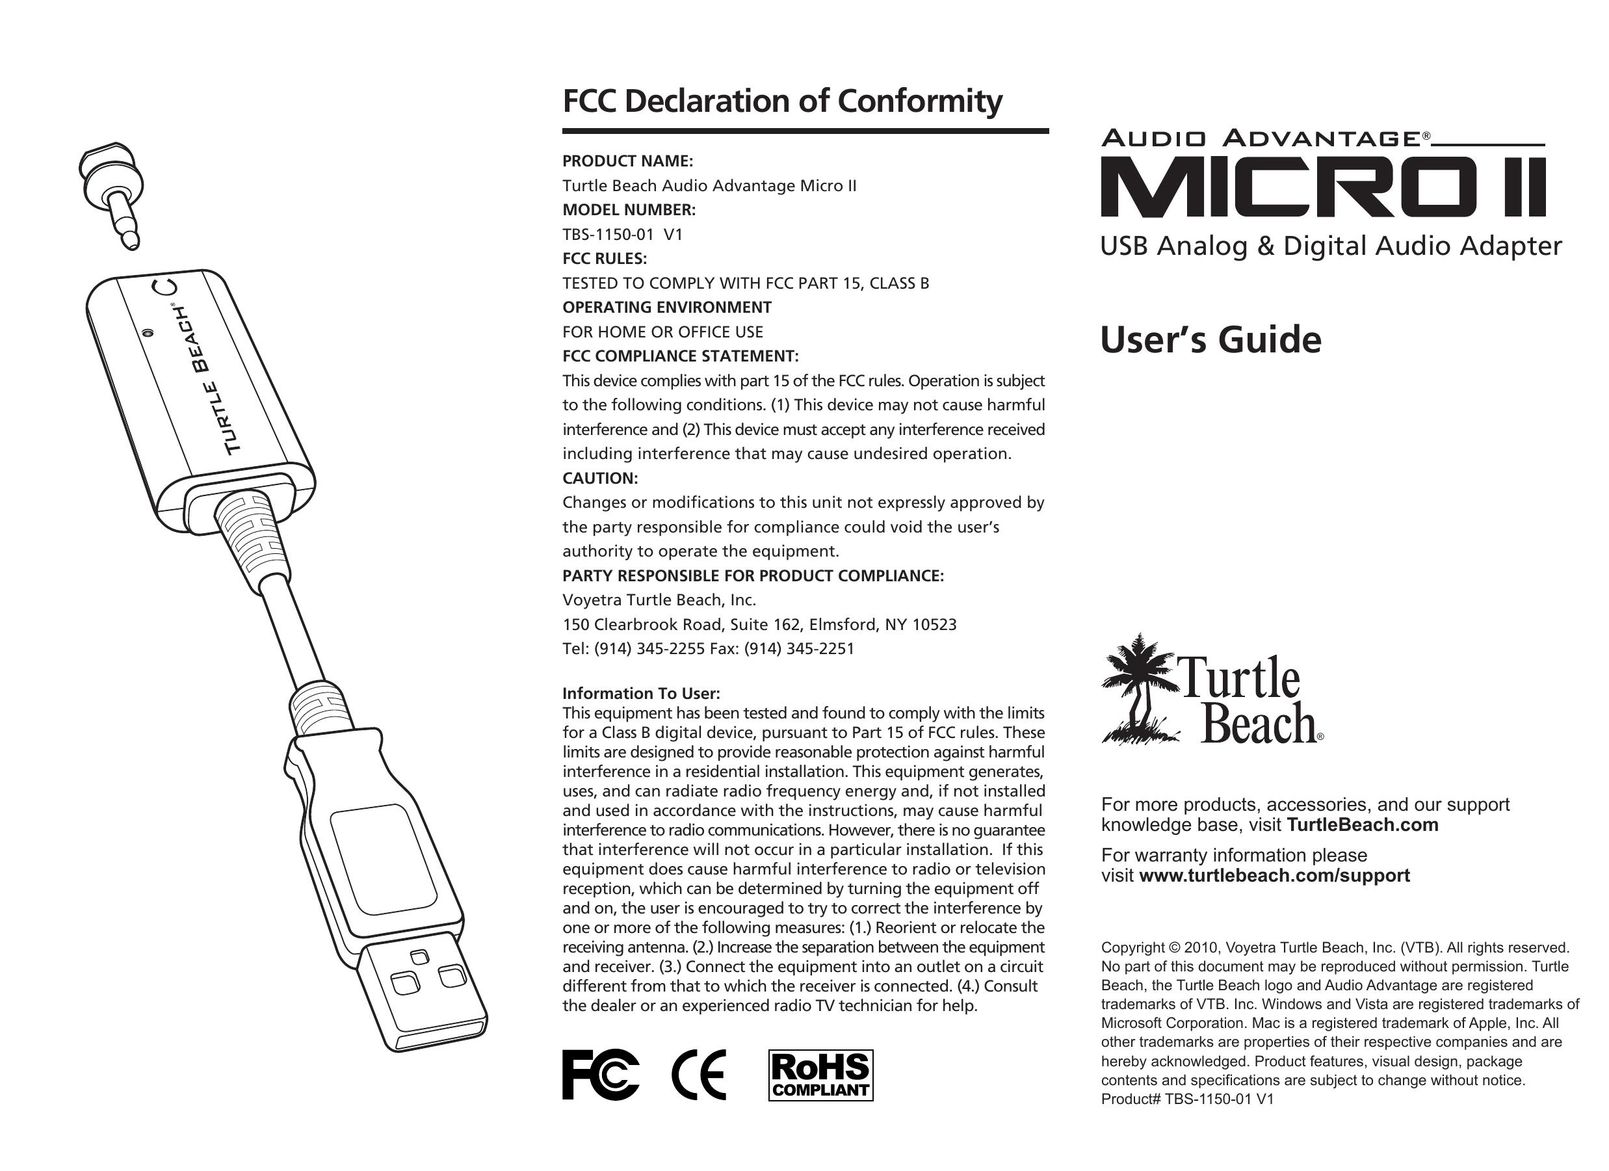 Turtle Beach TBS-1150-01 V1 Network Cables User Manual